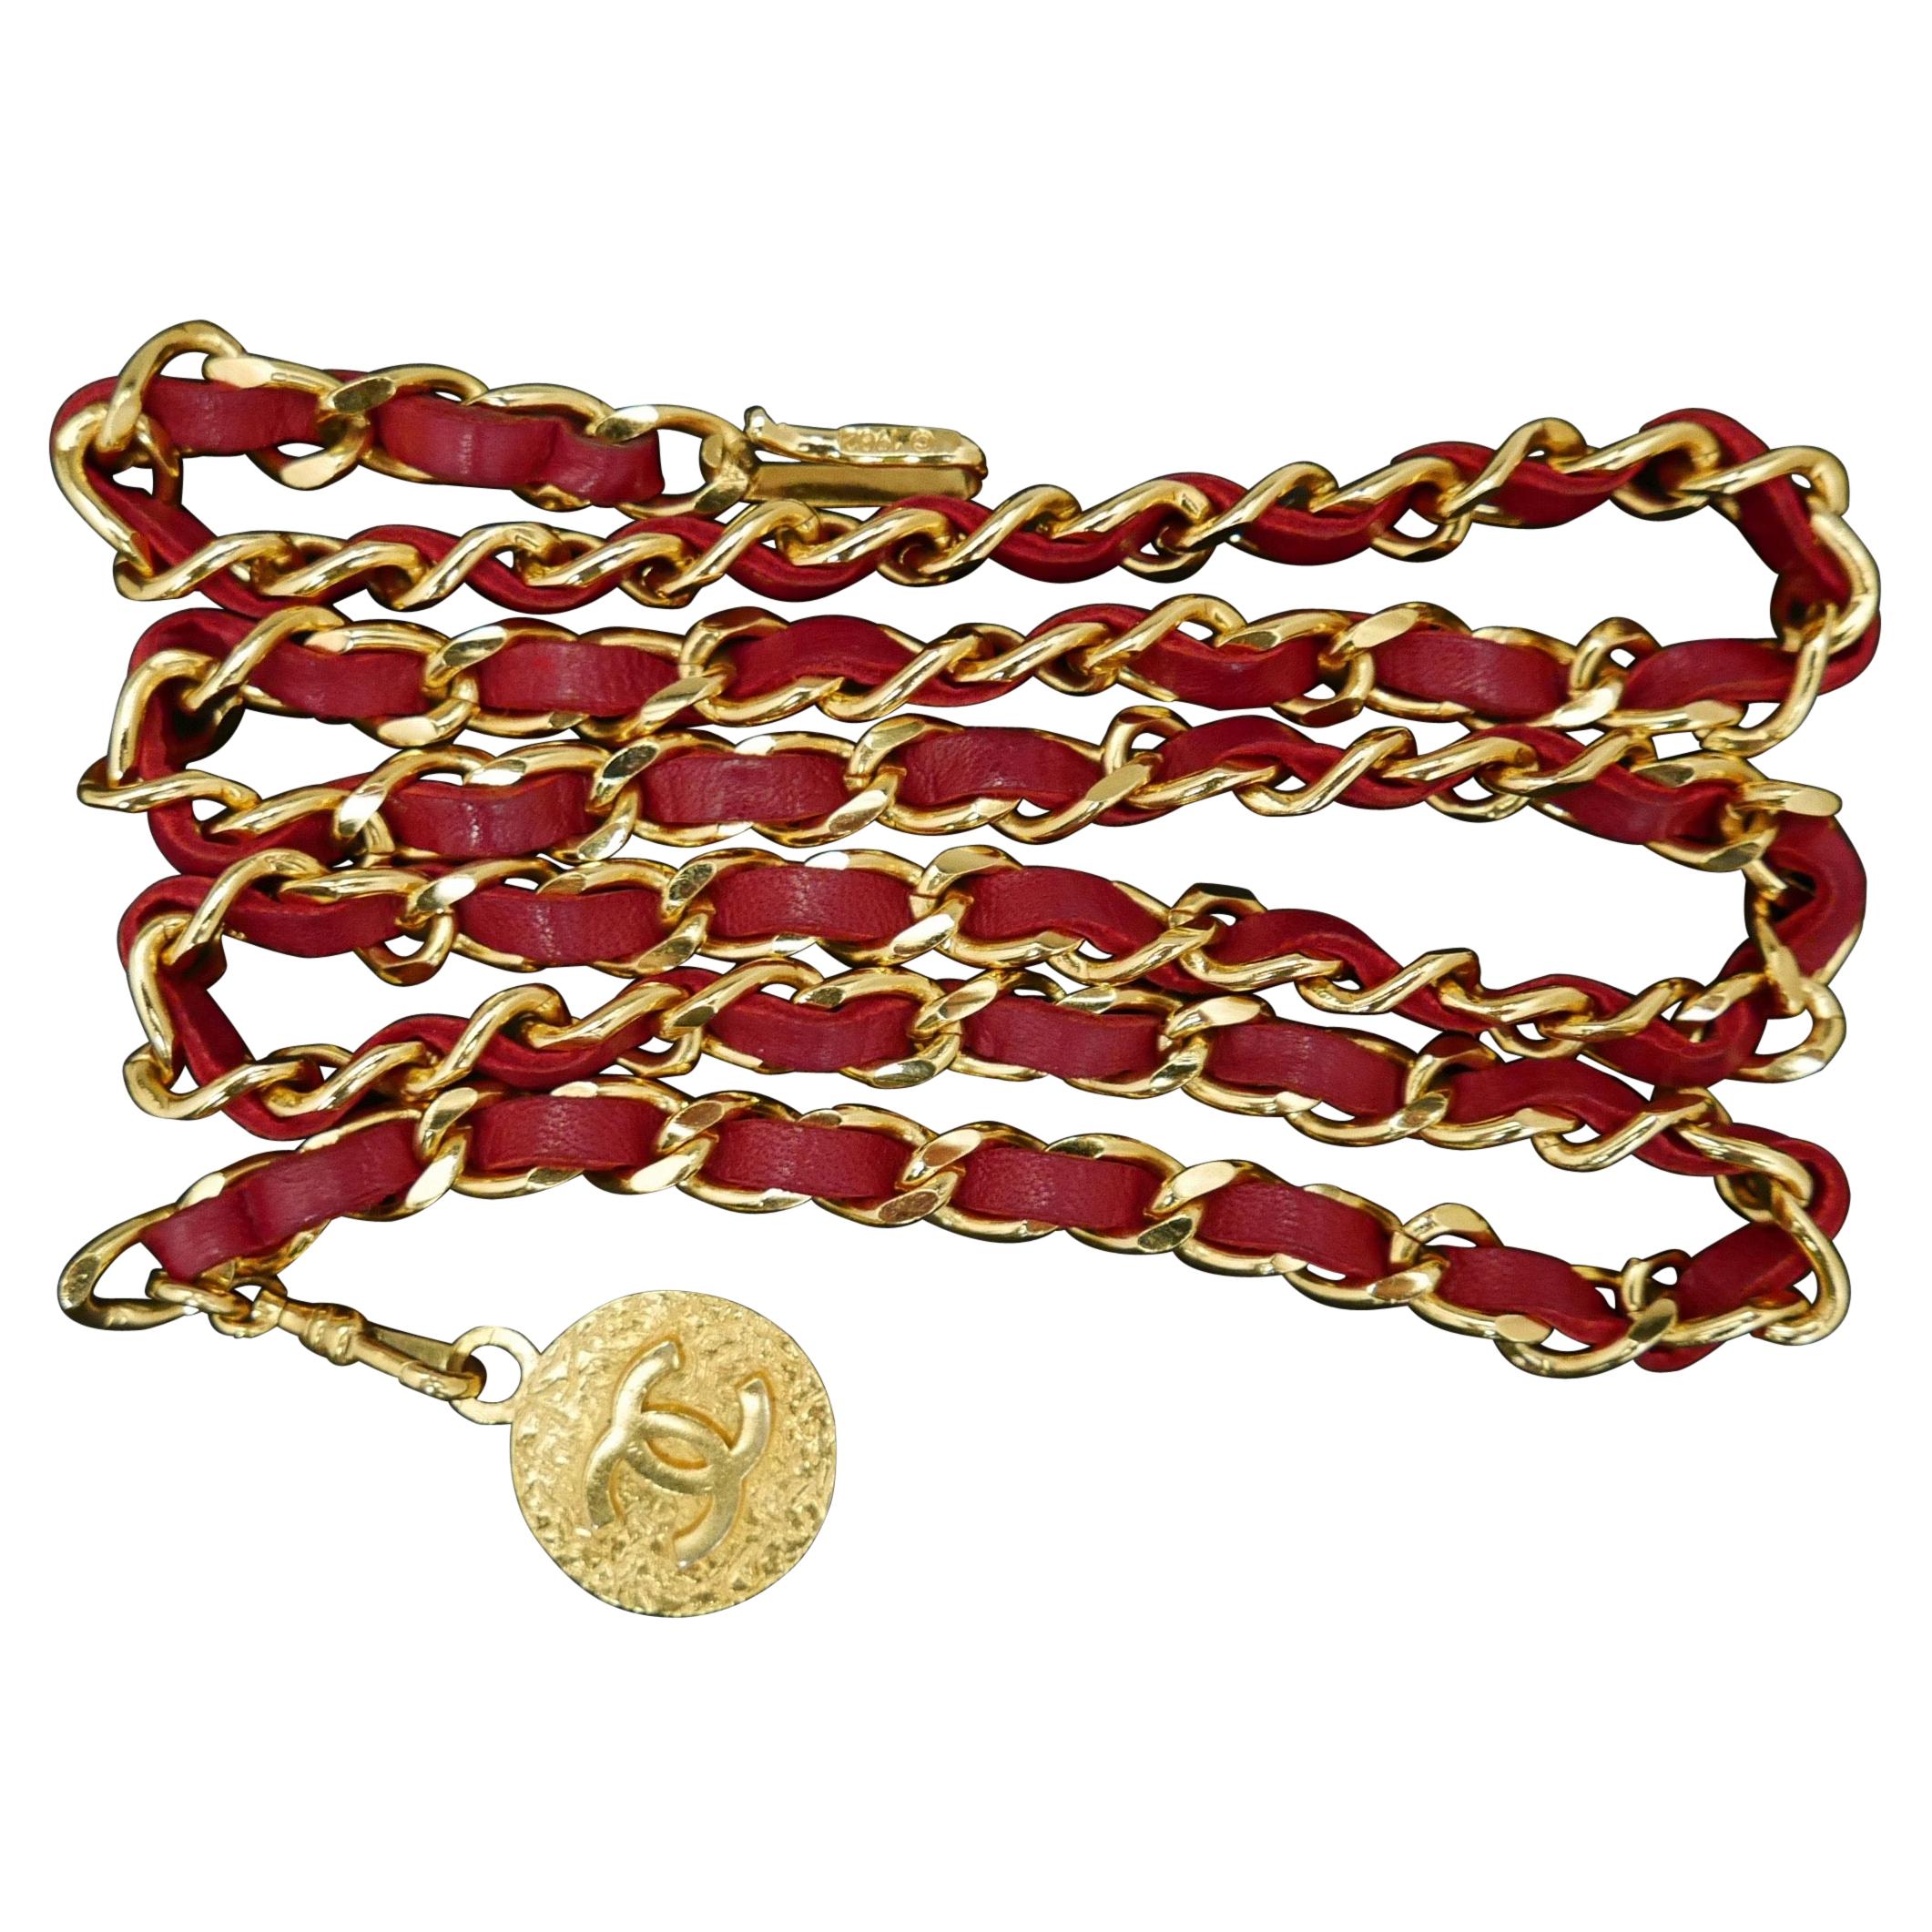 CHANEL Gold Plated Red Leather Chain Belt Necklace